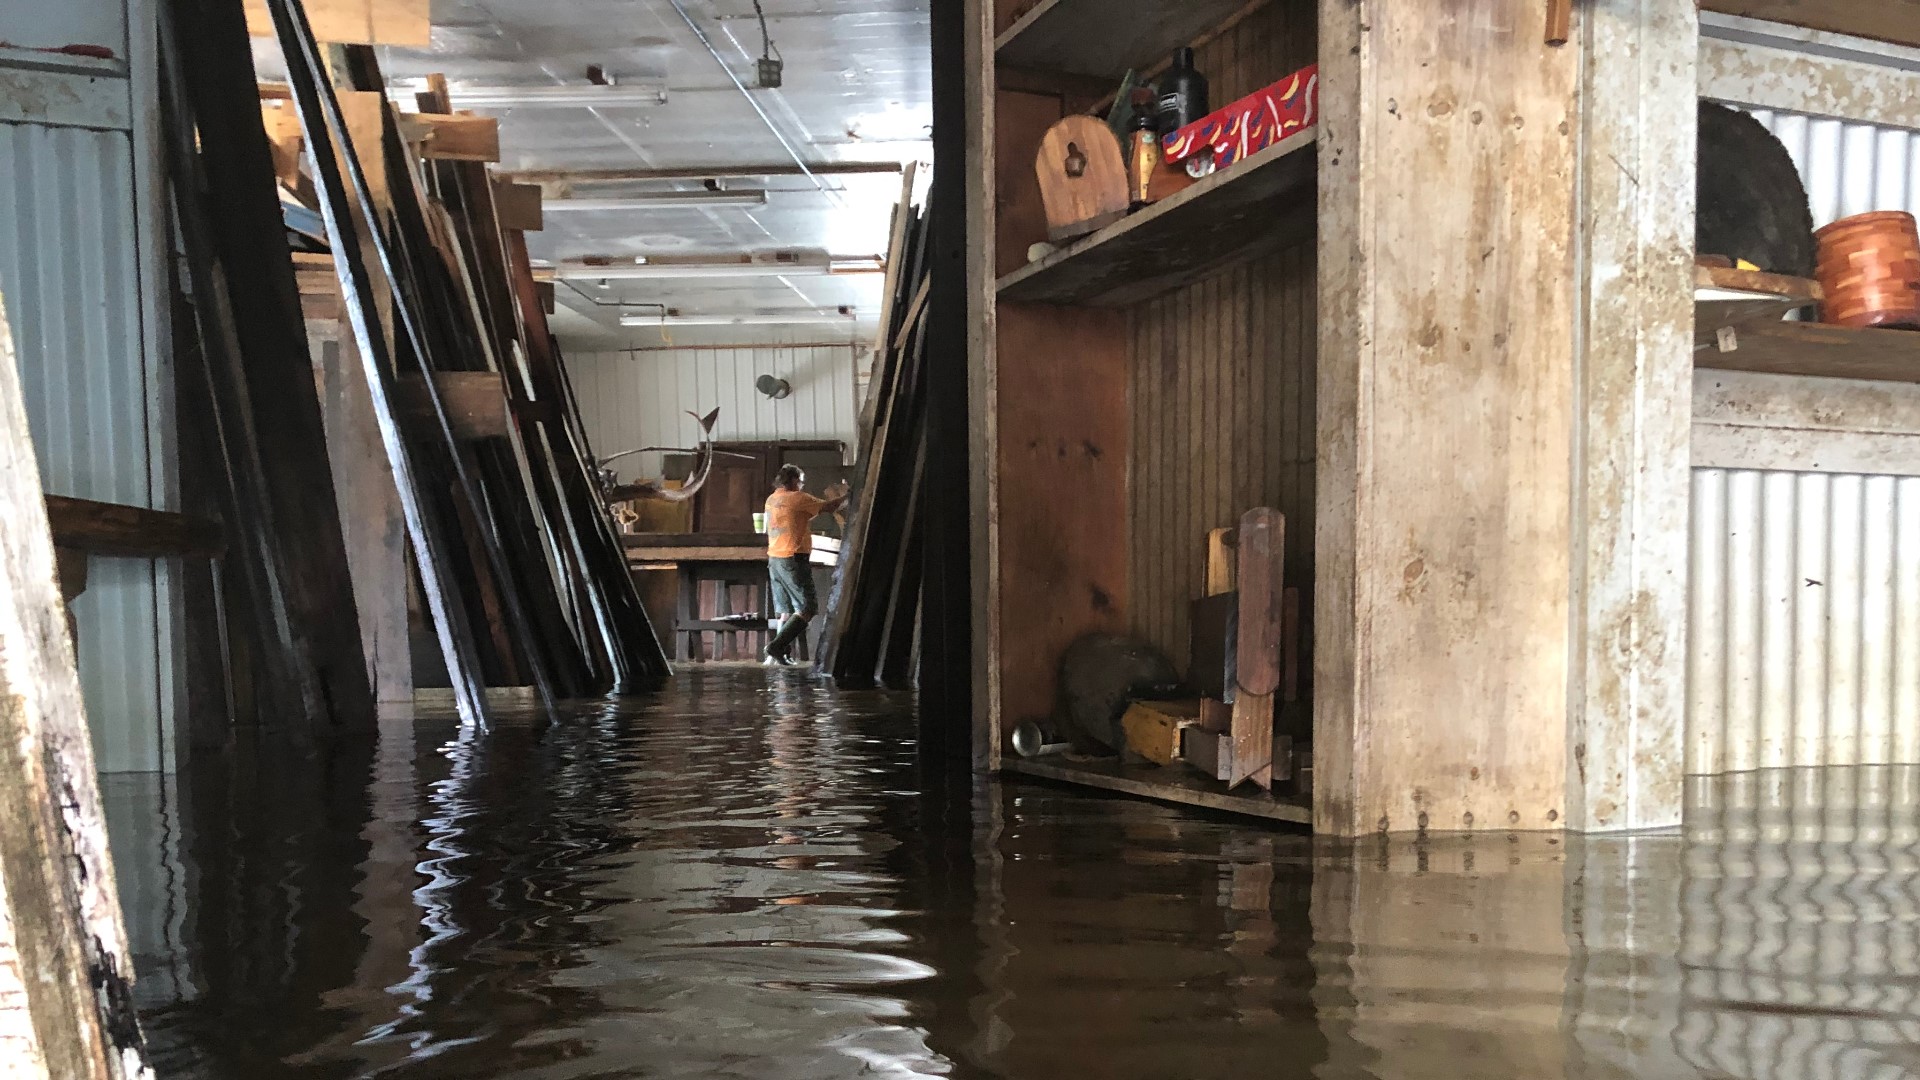 Dan Bechtold estimates he lost $100,000 from the flooding. His hardwood shop has only been open for eight days since late March.